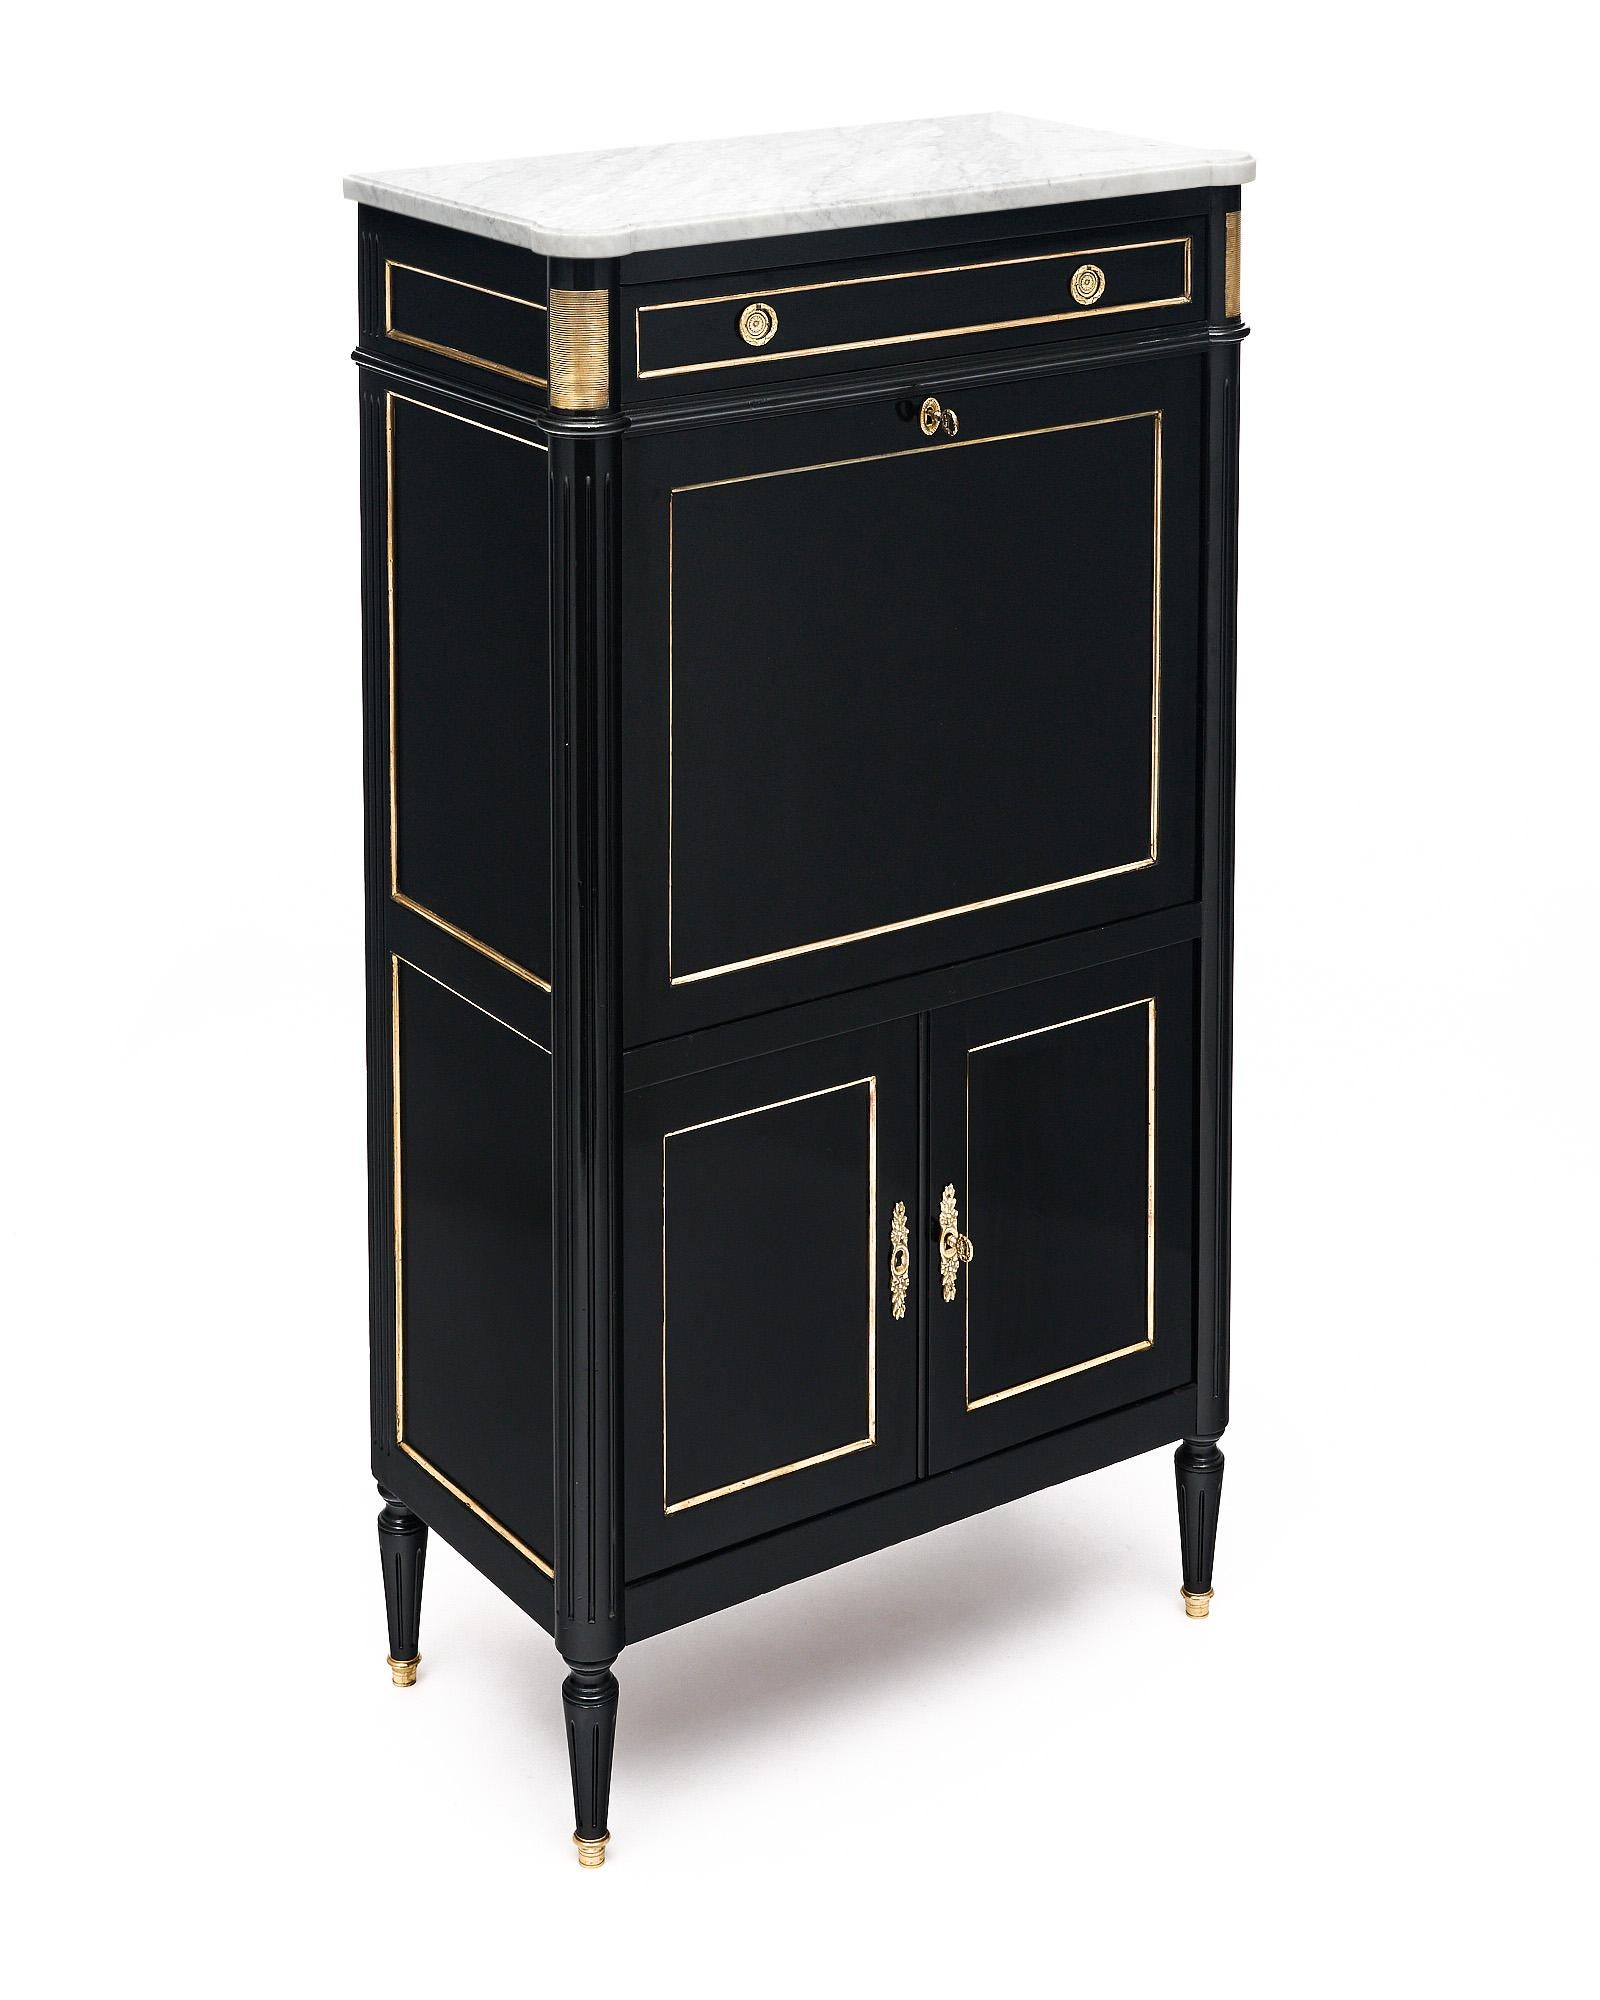 Secretary, drop front desk, from France, of Mahogany in the Louis XVI style. This cabinet is finished in a lustrous museum quality ebonized French polish. There are two lower doors with working lock and key that open to interior shelving. The drop